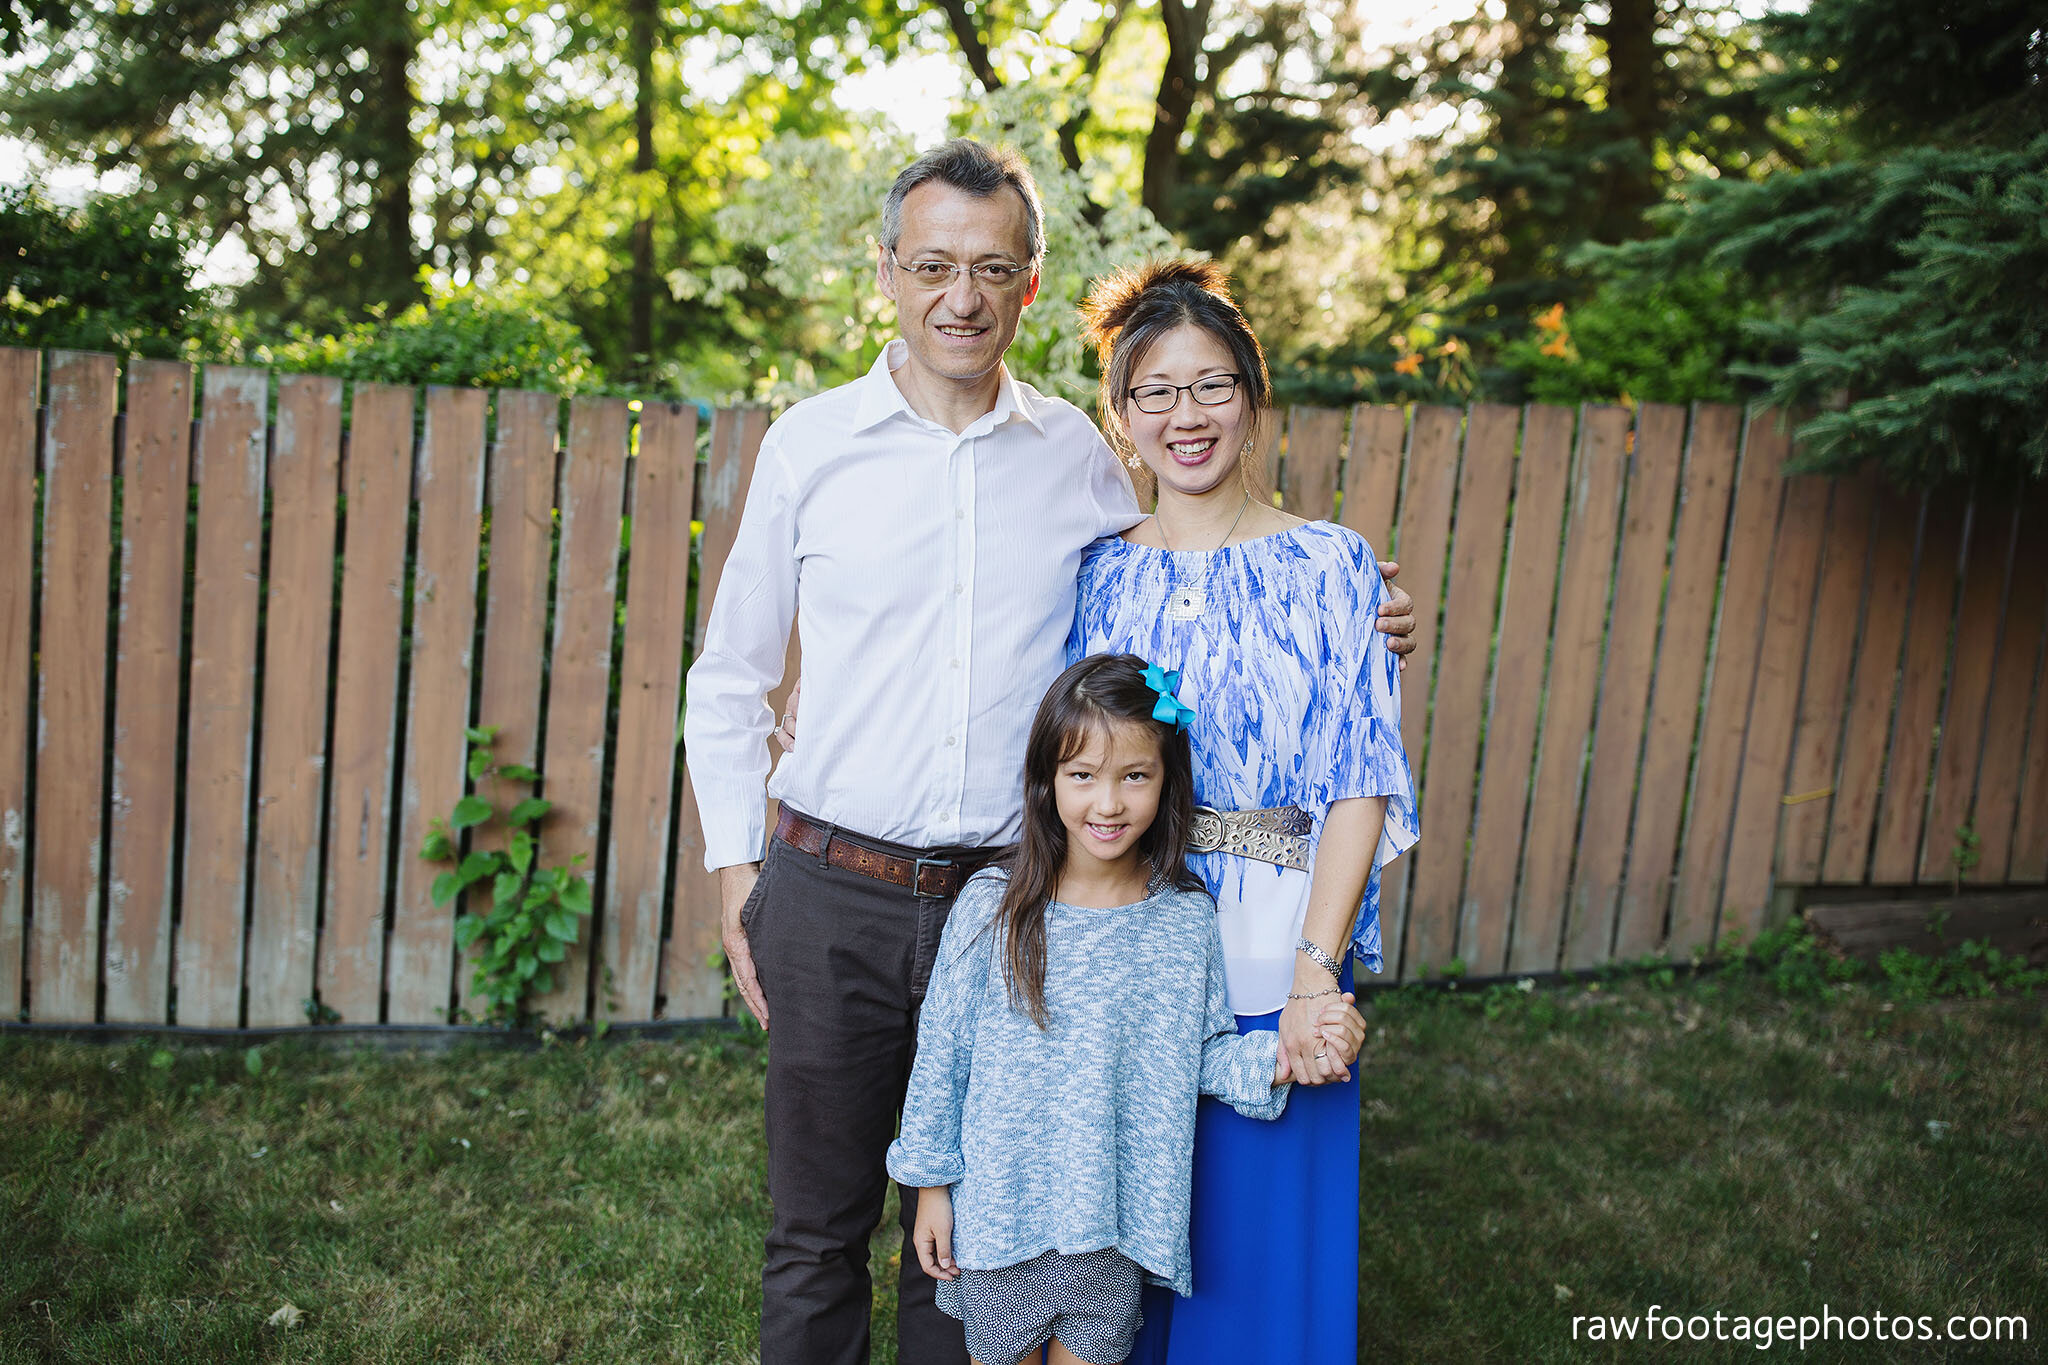 london_ontario_family_photographer-extended_family_session-grandparents-cousins-backyard_session-civic_gardens-raw_footage_photography-012.jpg